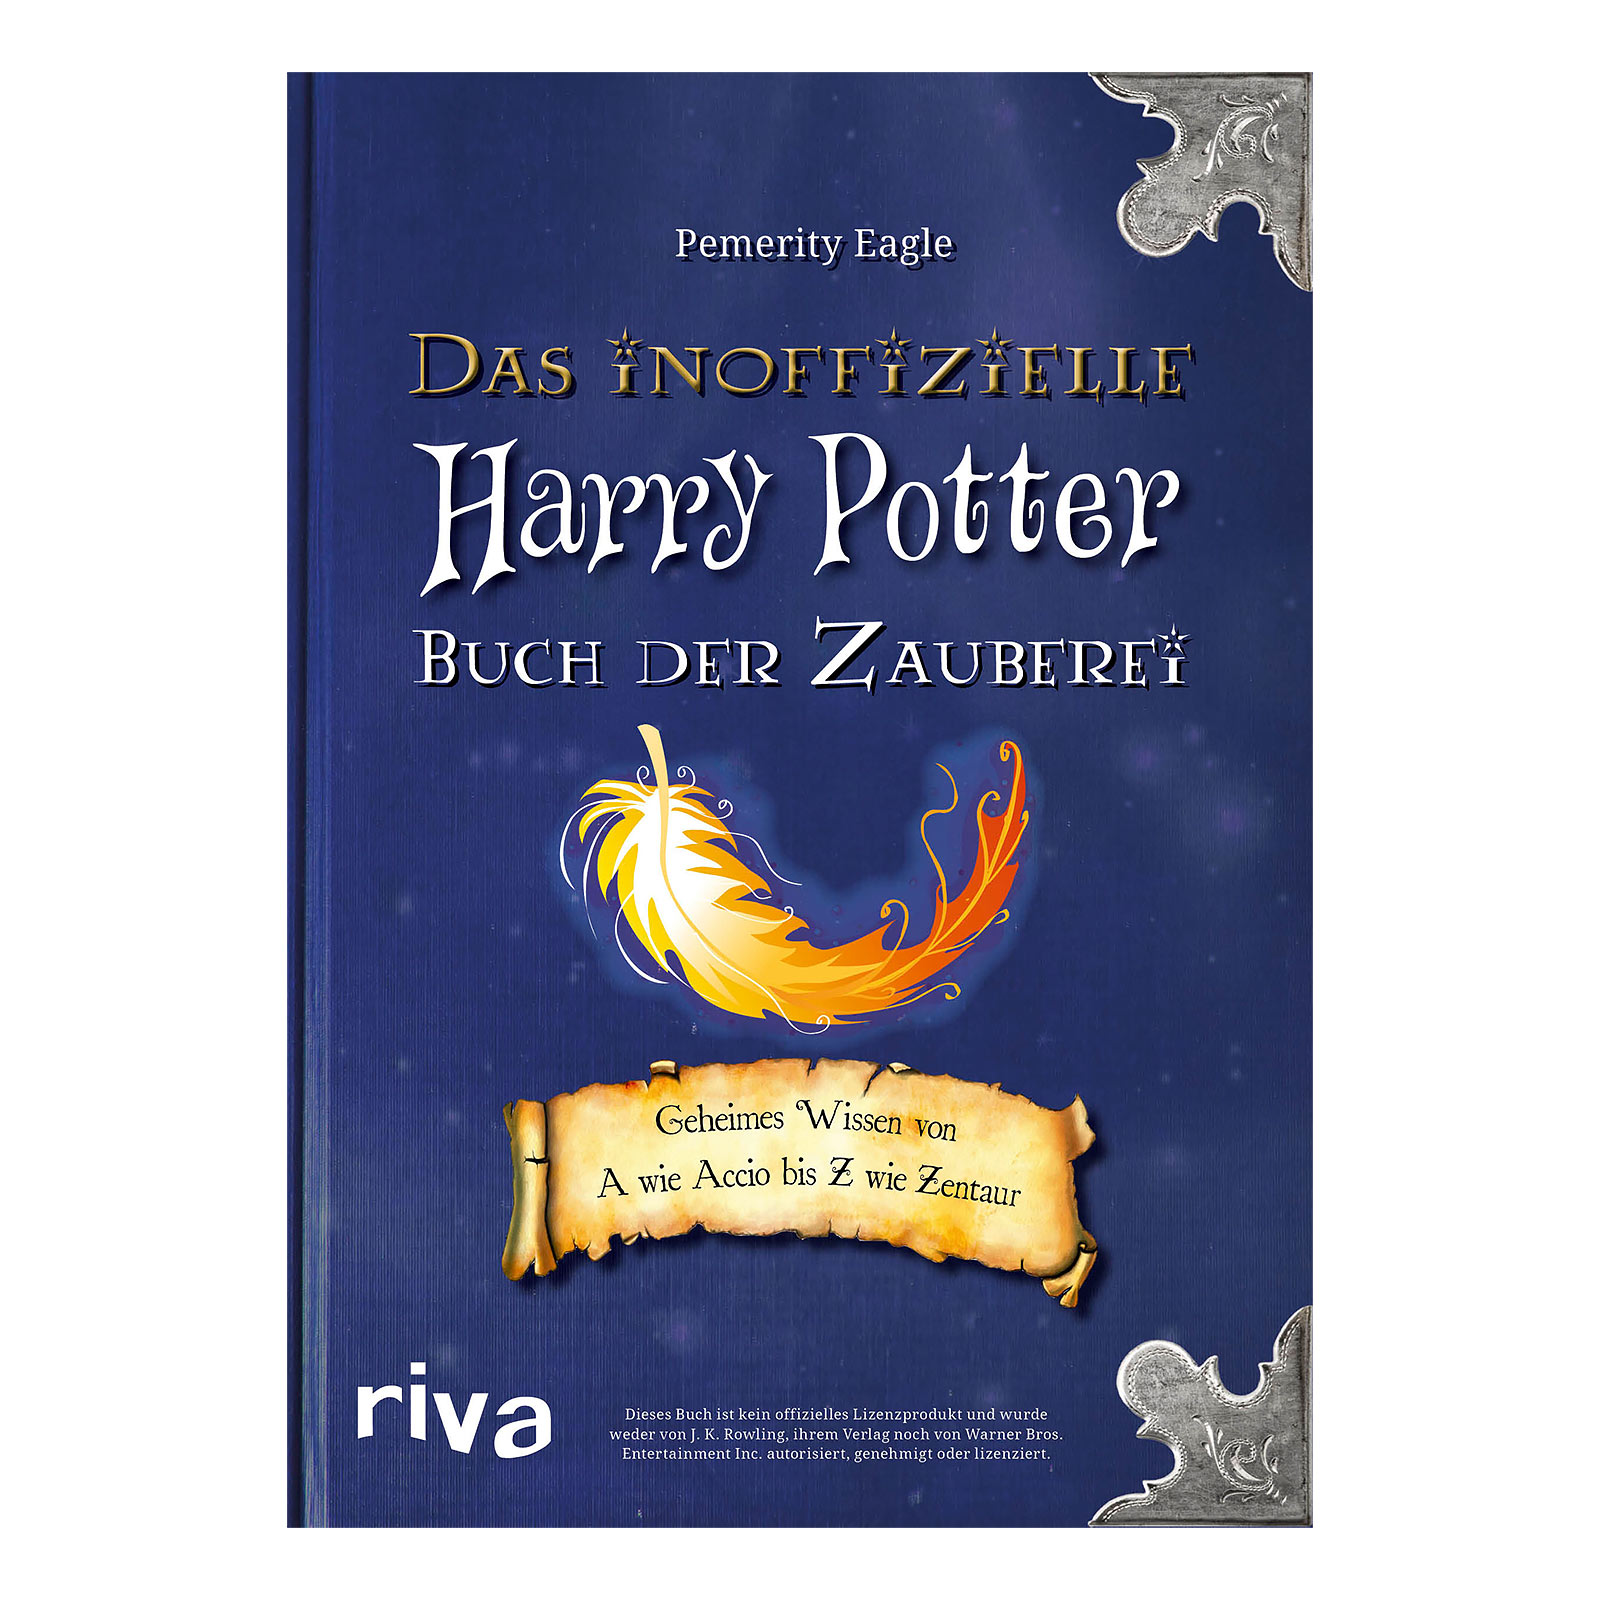 Harry Potter - The Unofficial Book of Magic